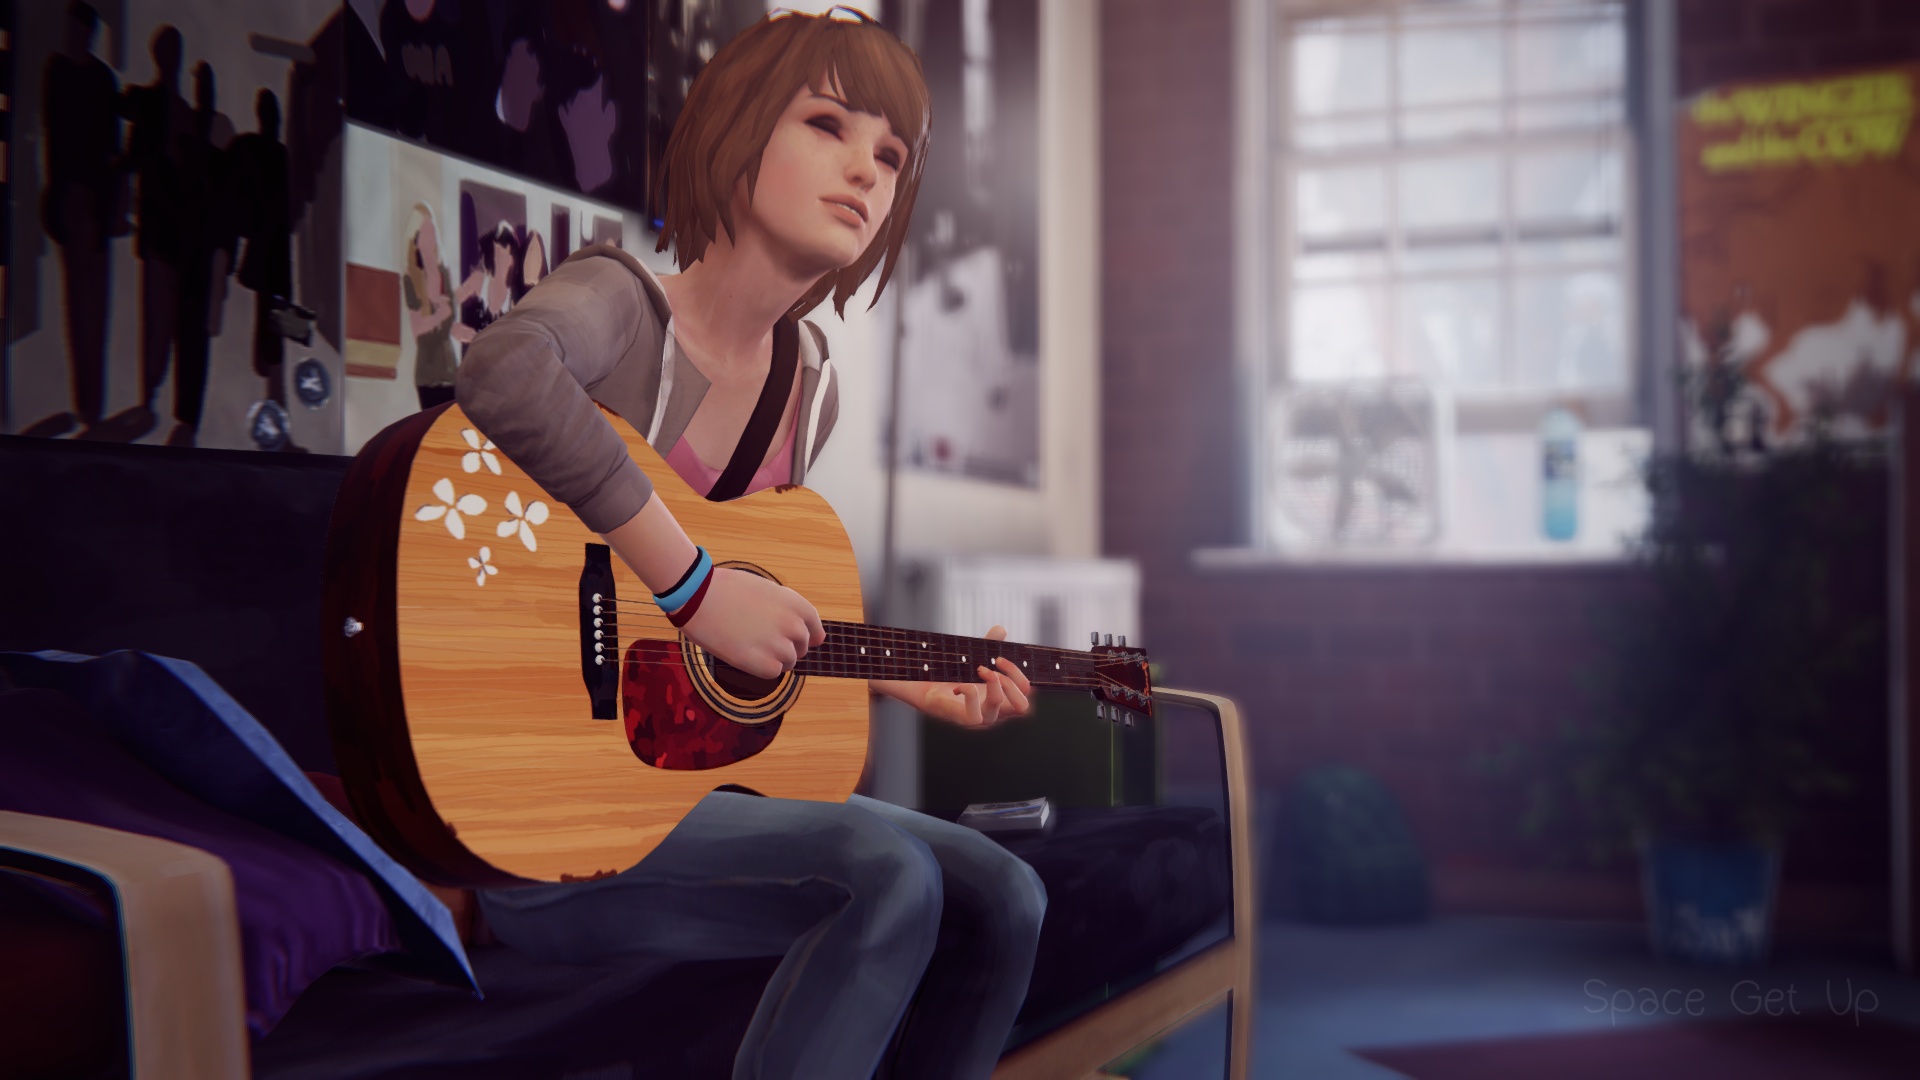 Life Is Strange Wallpapers Video Game Hq Life Is Strange Pictures 4k Wallpapers 2019